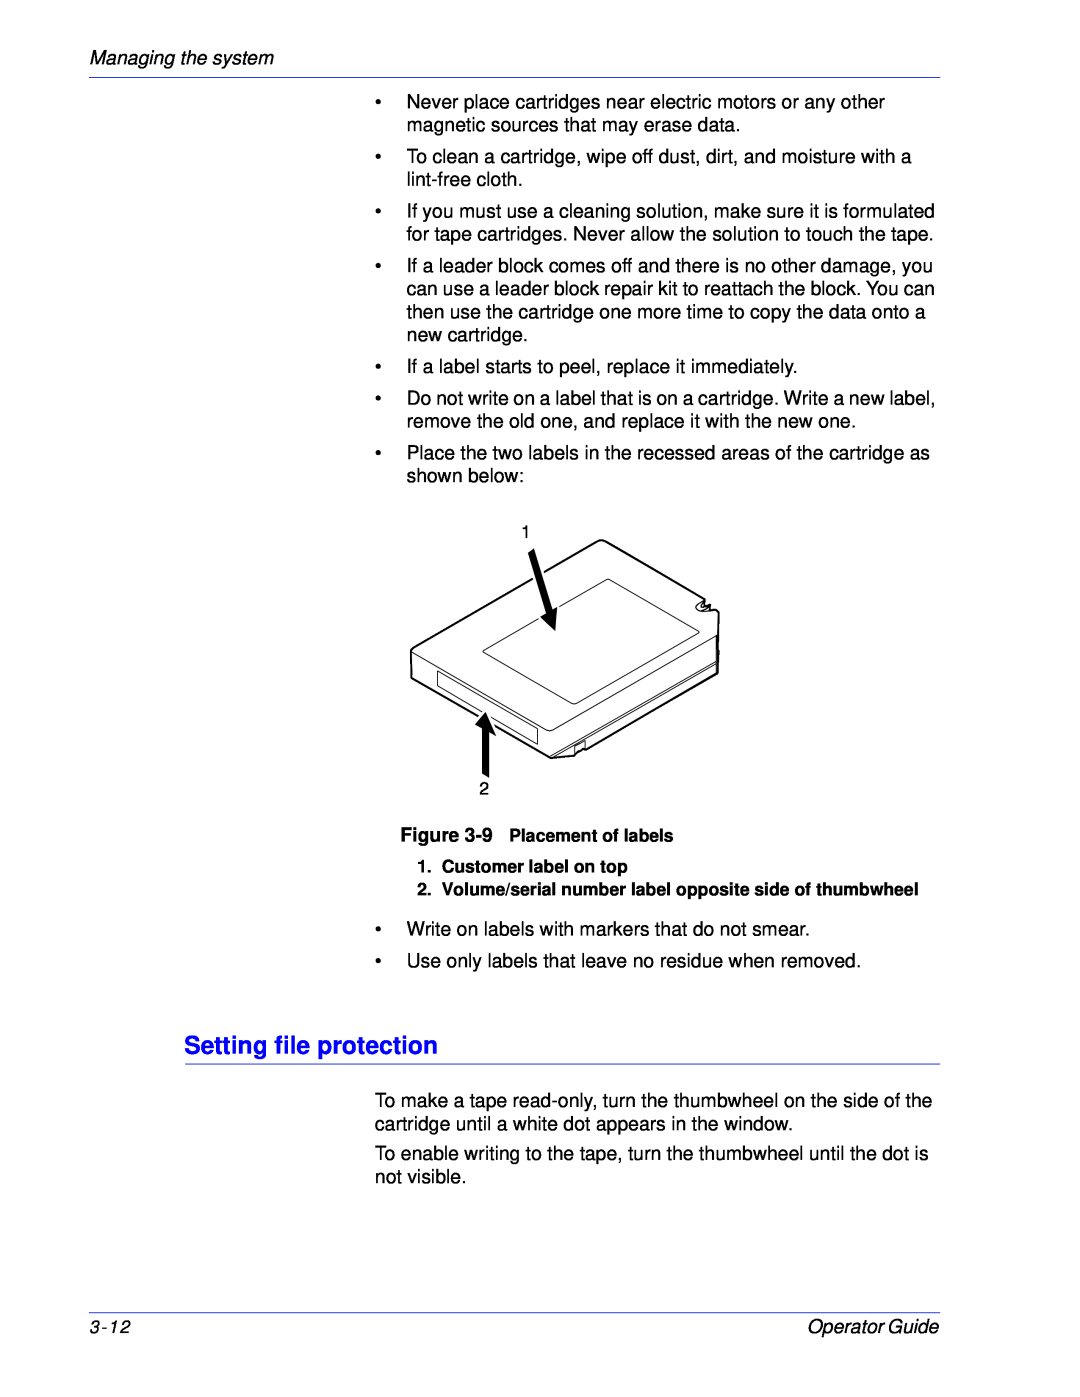 Xerox 100, 180 EPS manual Setting file protection, Managing the system 